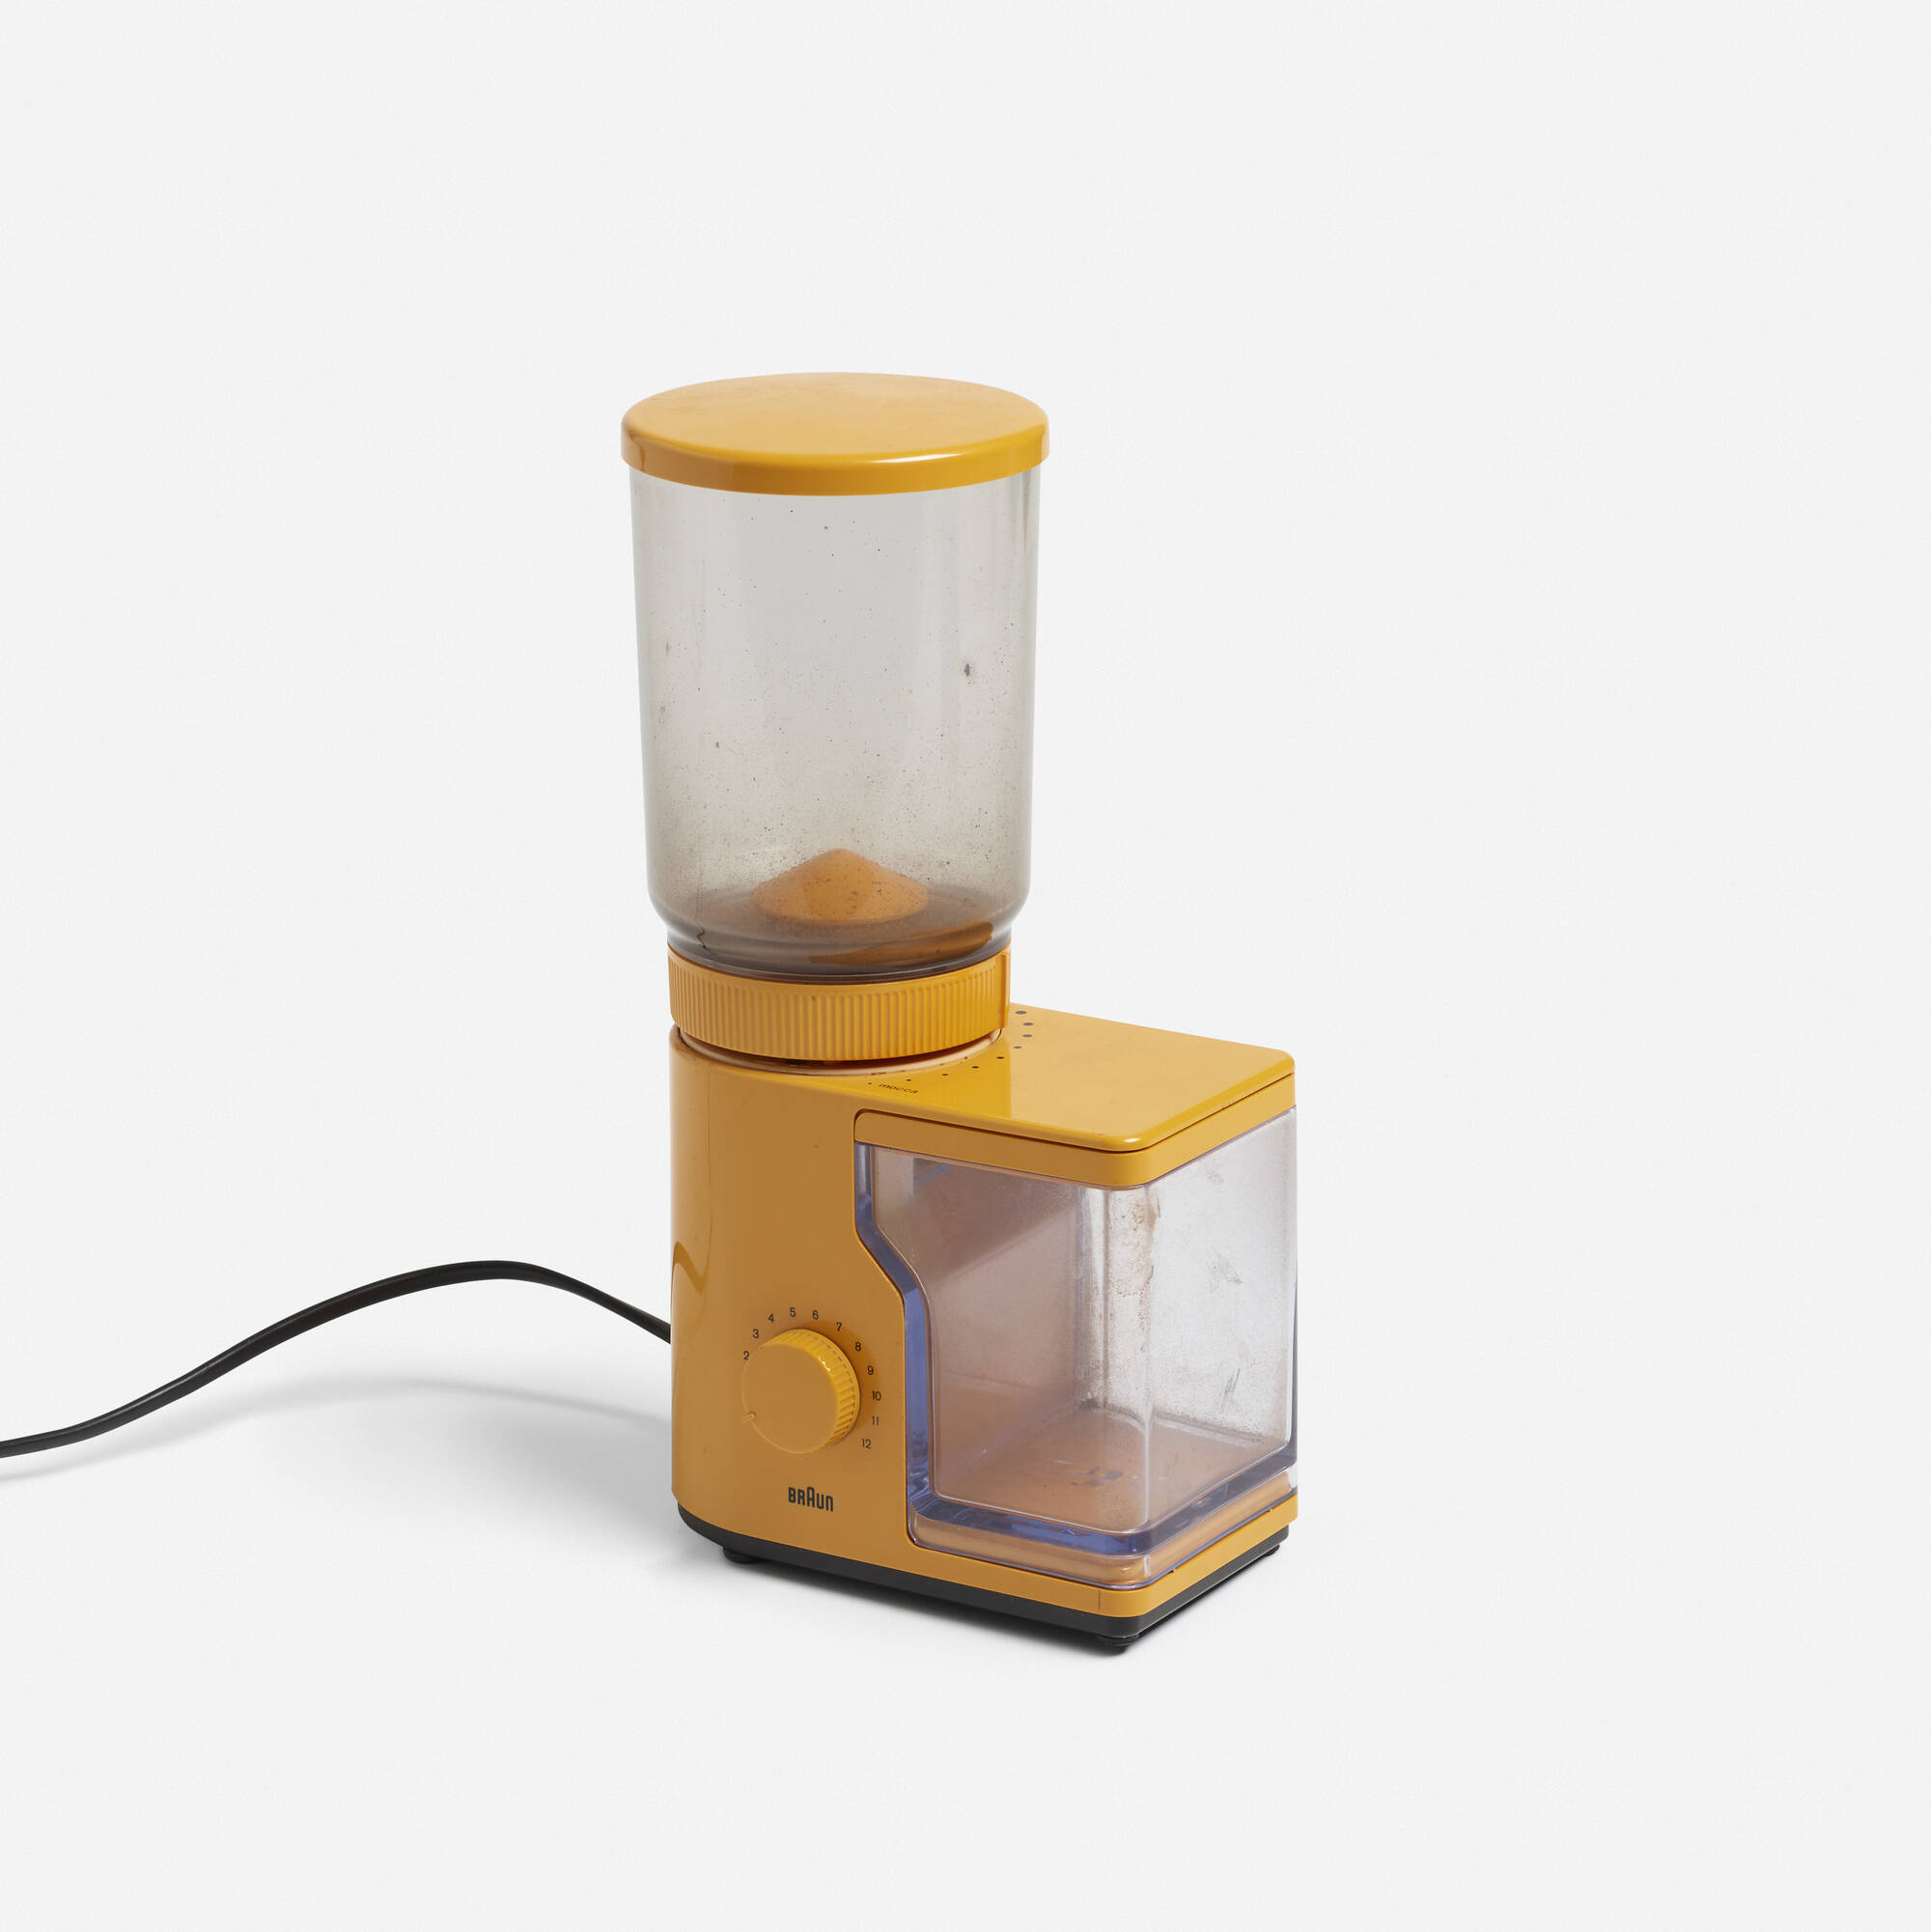 https://www.wright20.com/items/index/2000/209_1_dieter_rams_the_jf_chen_collection_july_2018_reinhold_weiss_and_hartwig_kahlcke_kmm_10_coffee_grinder__wright_auction.jpg?t=1628024380